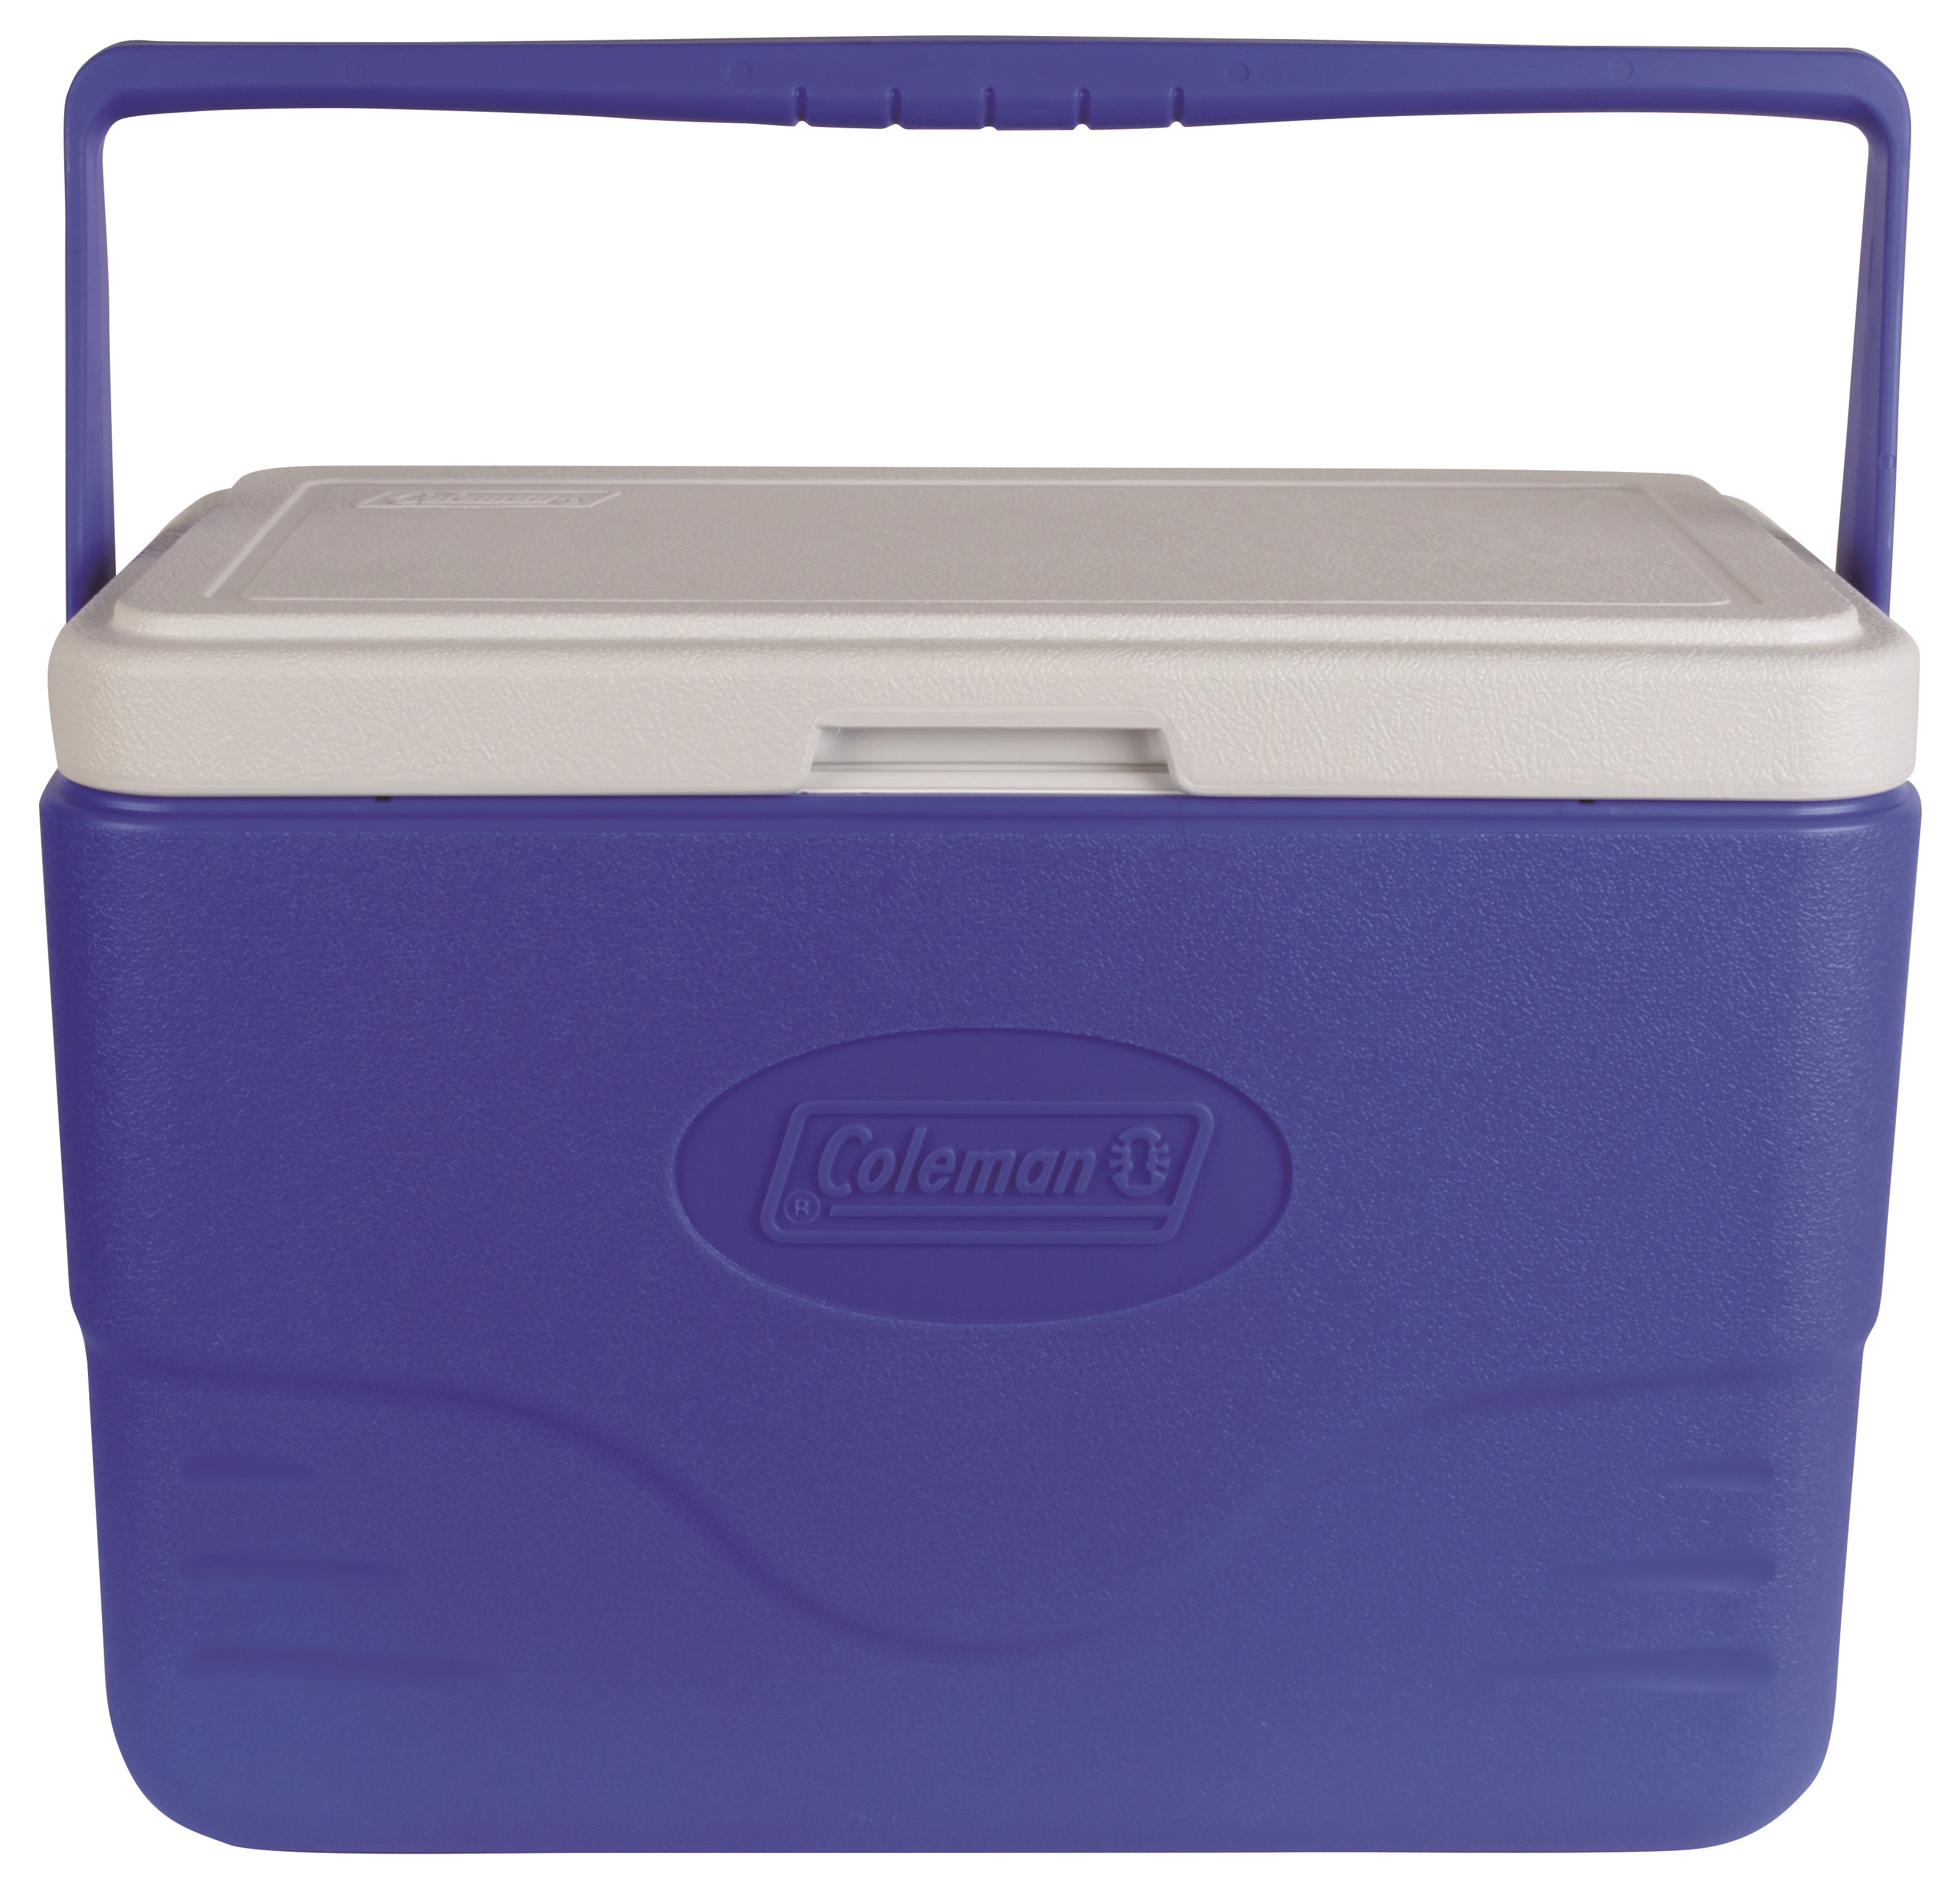 Coleman 28 Qt Hard Cooler Chest with Handle, Blue - image 4 of 5